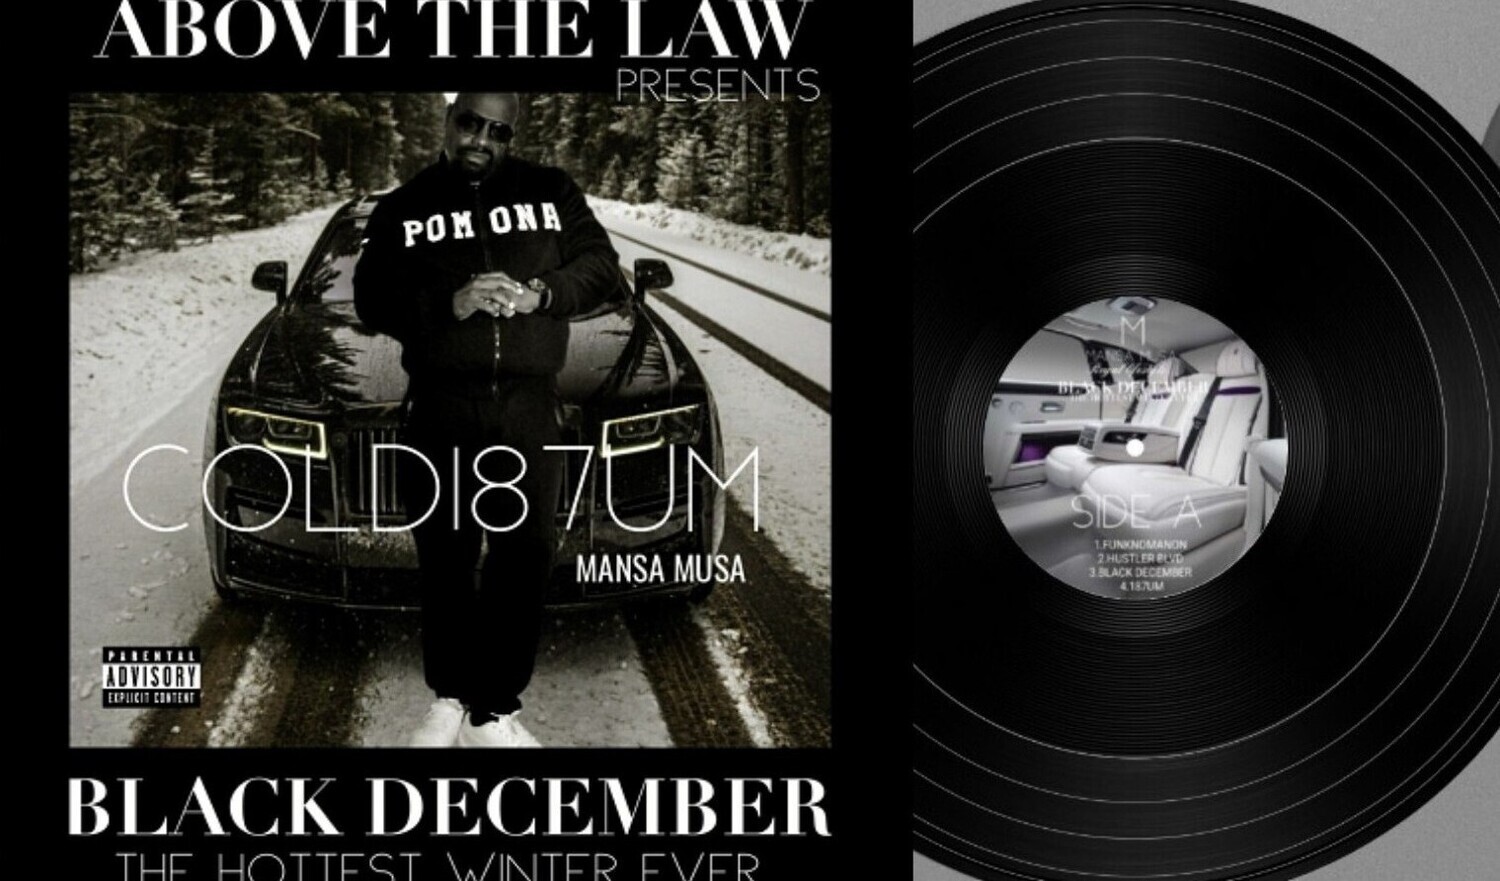 ABOVE THE LAW PRESENTS BLACK
DECEMBER THE HOTTEST WINTER EVER BY COLD187UM MANSA MUSA
ON 12&quot; VYNL shipping included